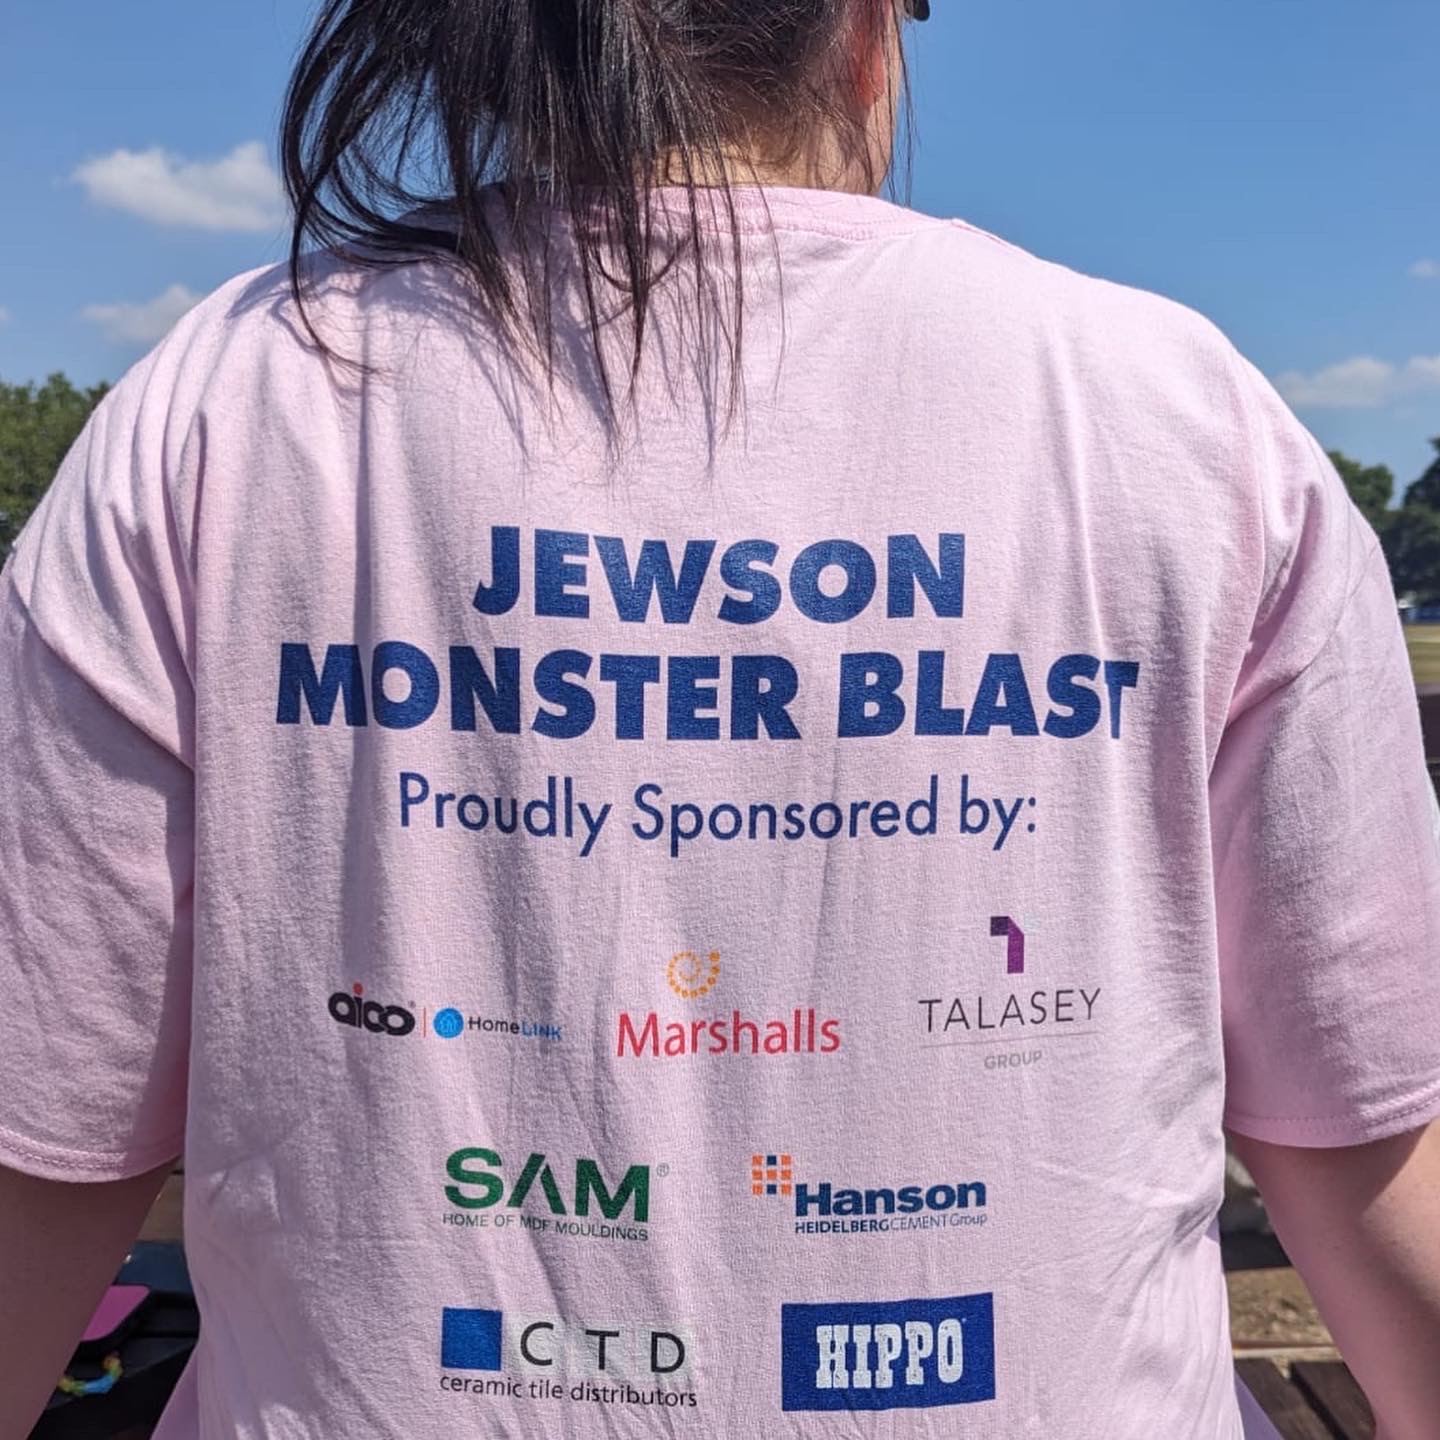 Unhooked Communications supported Jewson with its charity fundraising cricket event to raise money for Band of Builders